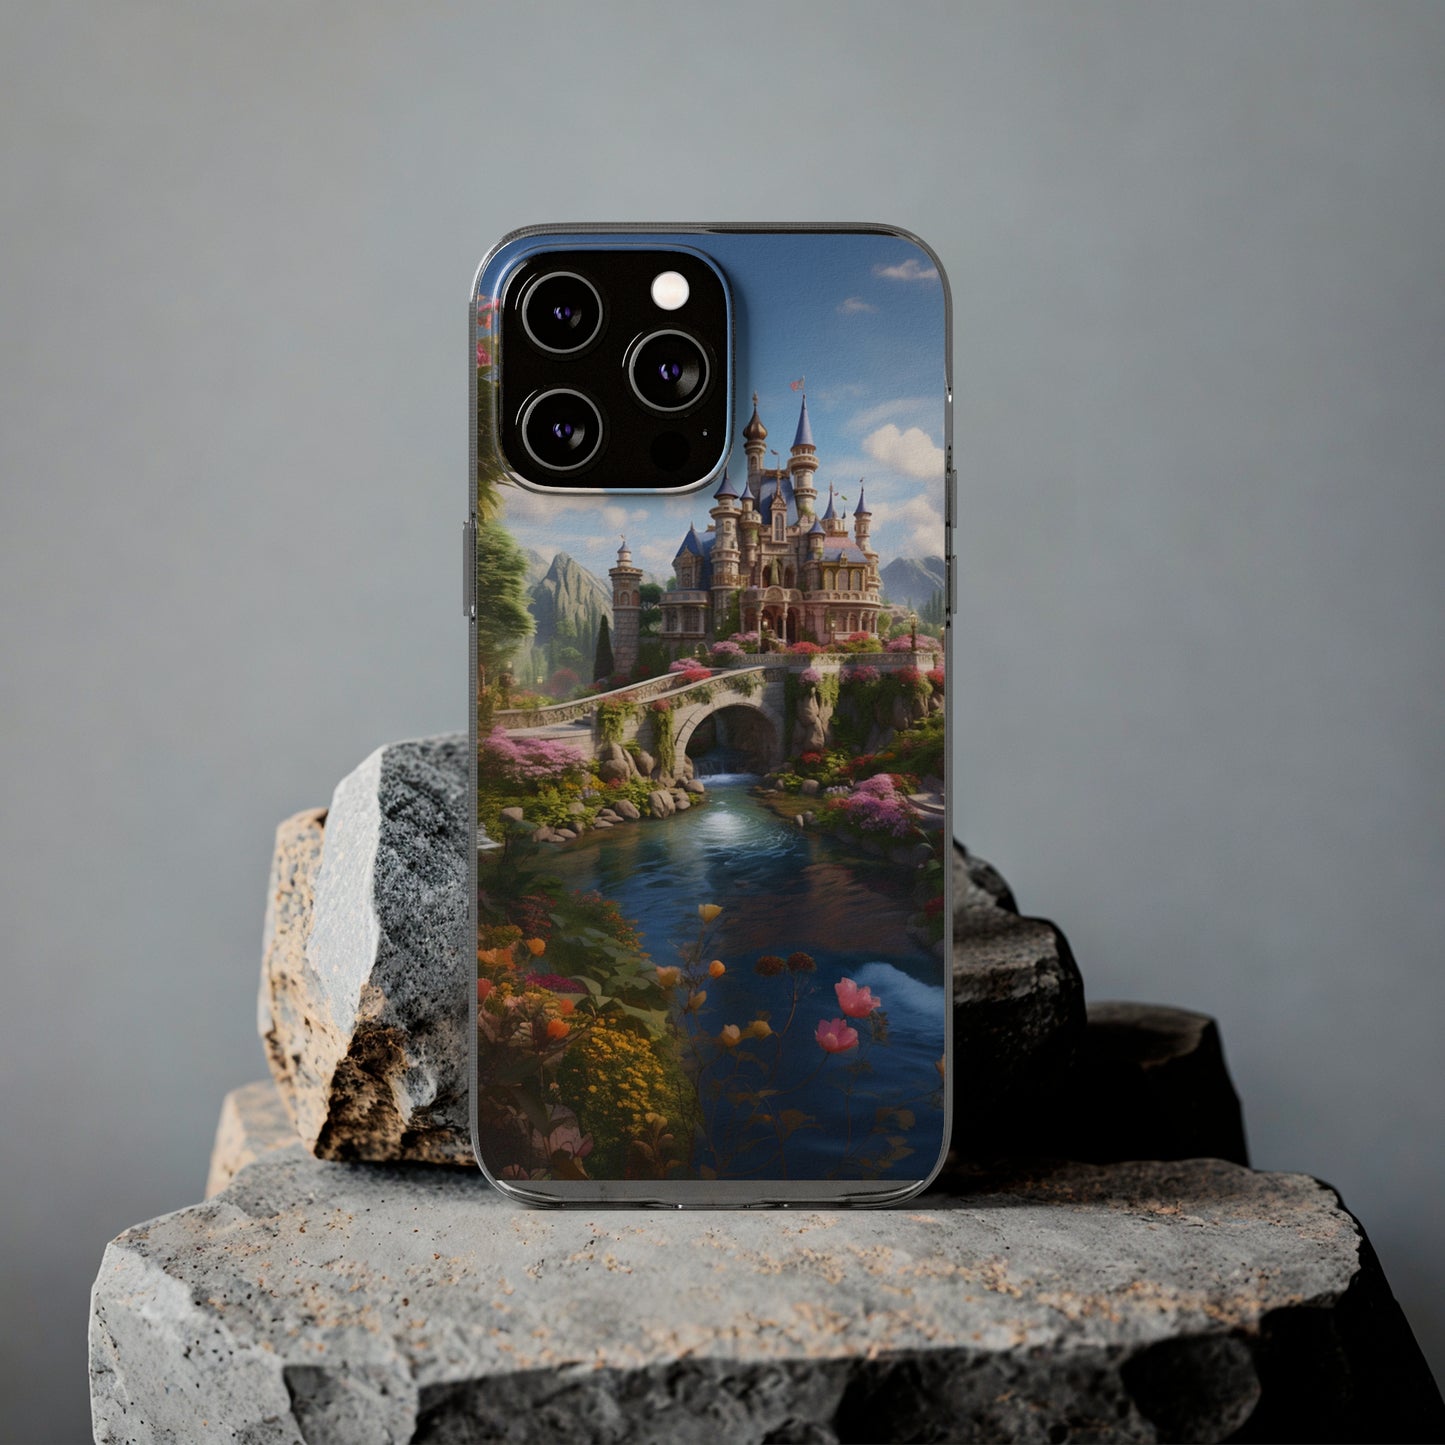 castle iphone case, carpet cult, Clear Silicone Phone Cases, iphone case, castle, castle iphone, castle view, stunning castle, magical castle, magic, magical,